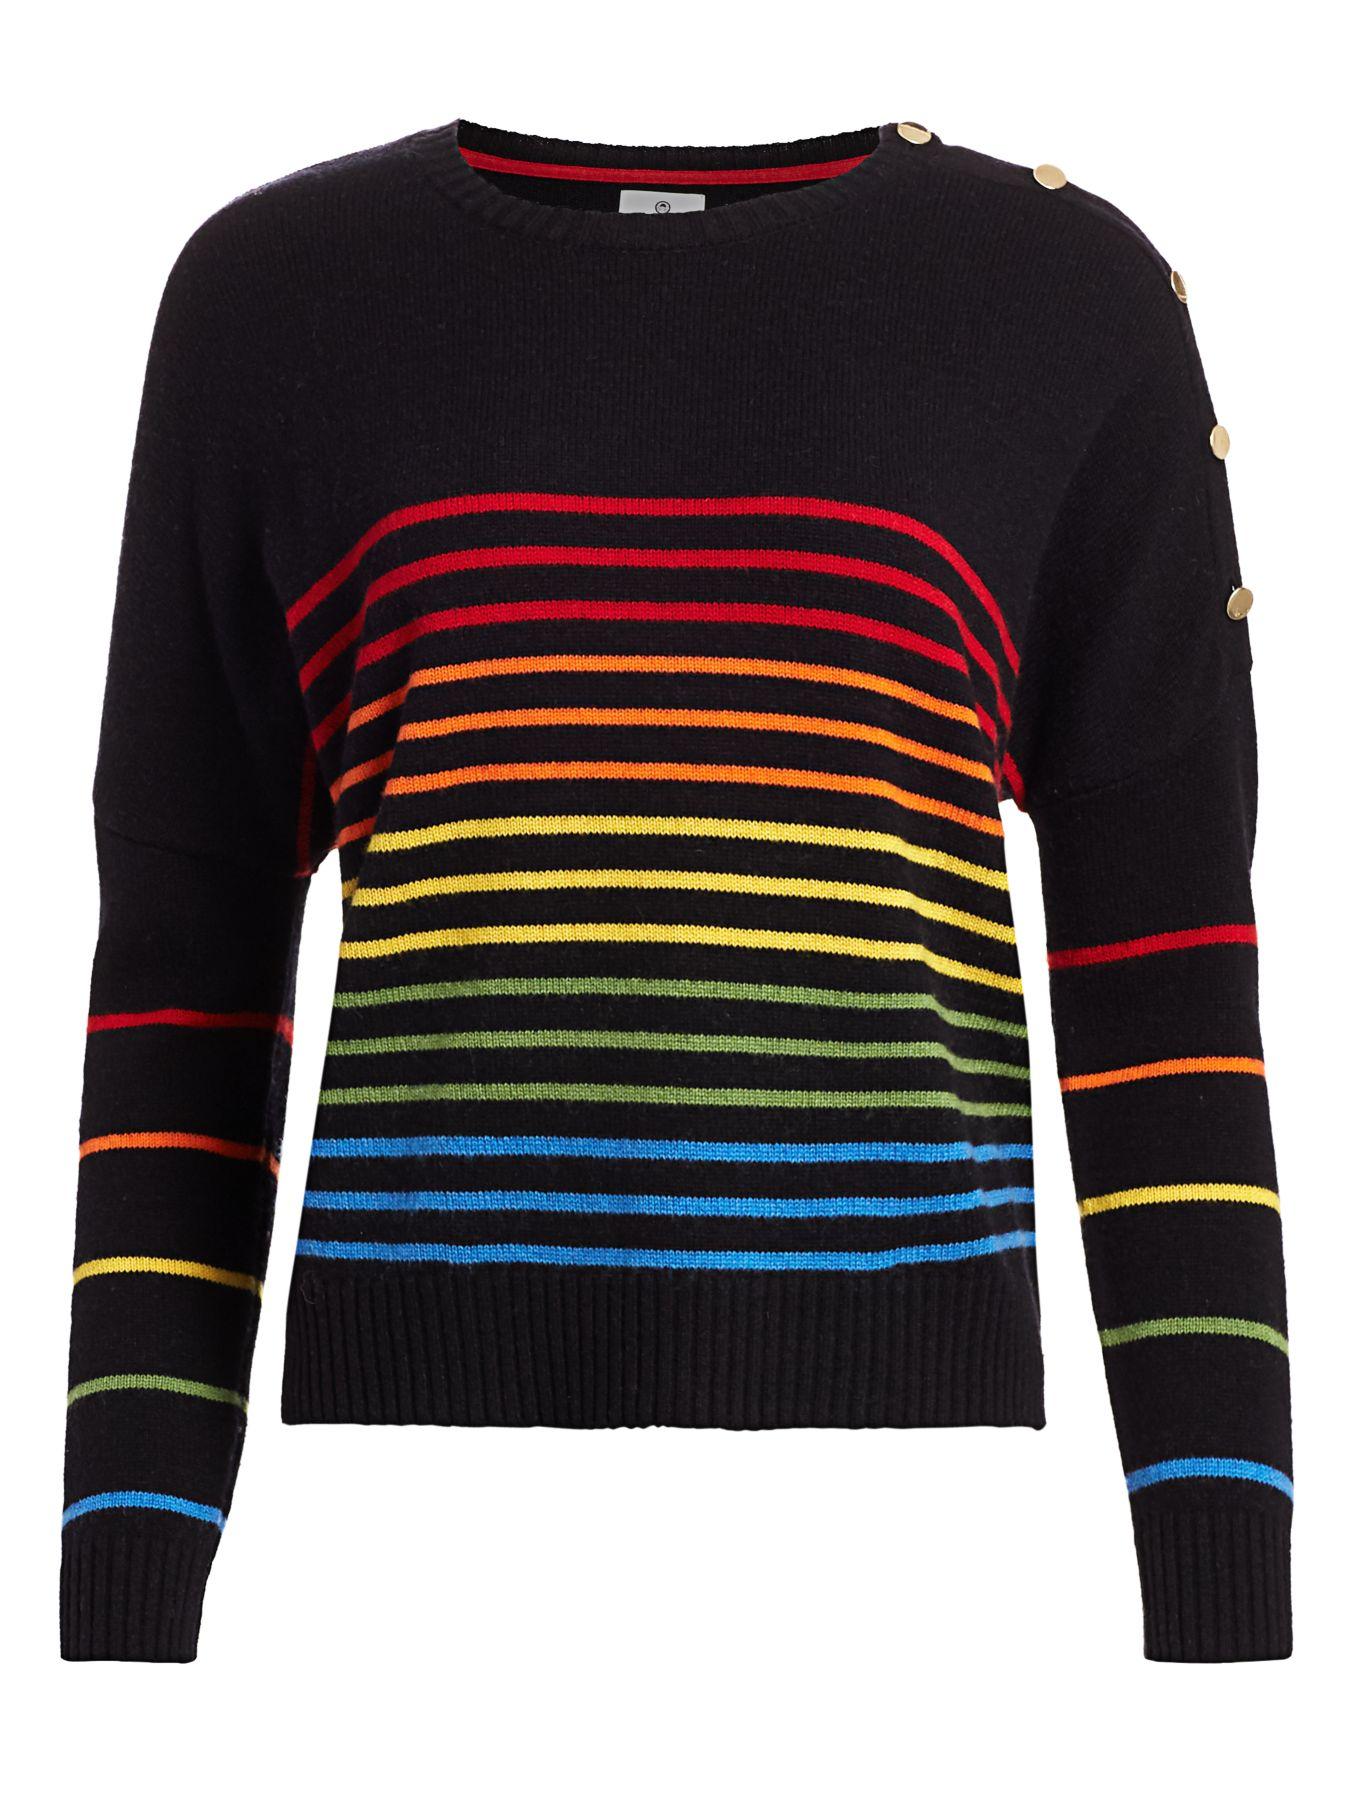 Sundry Cashmere Rainbow Stripes Knit Sweater in Black - Lyst